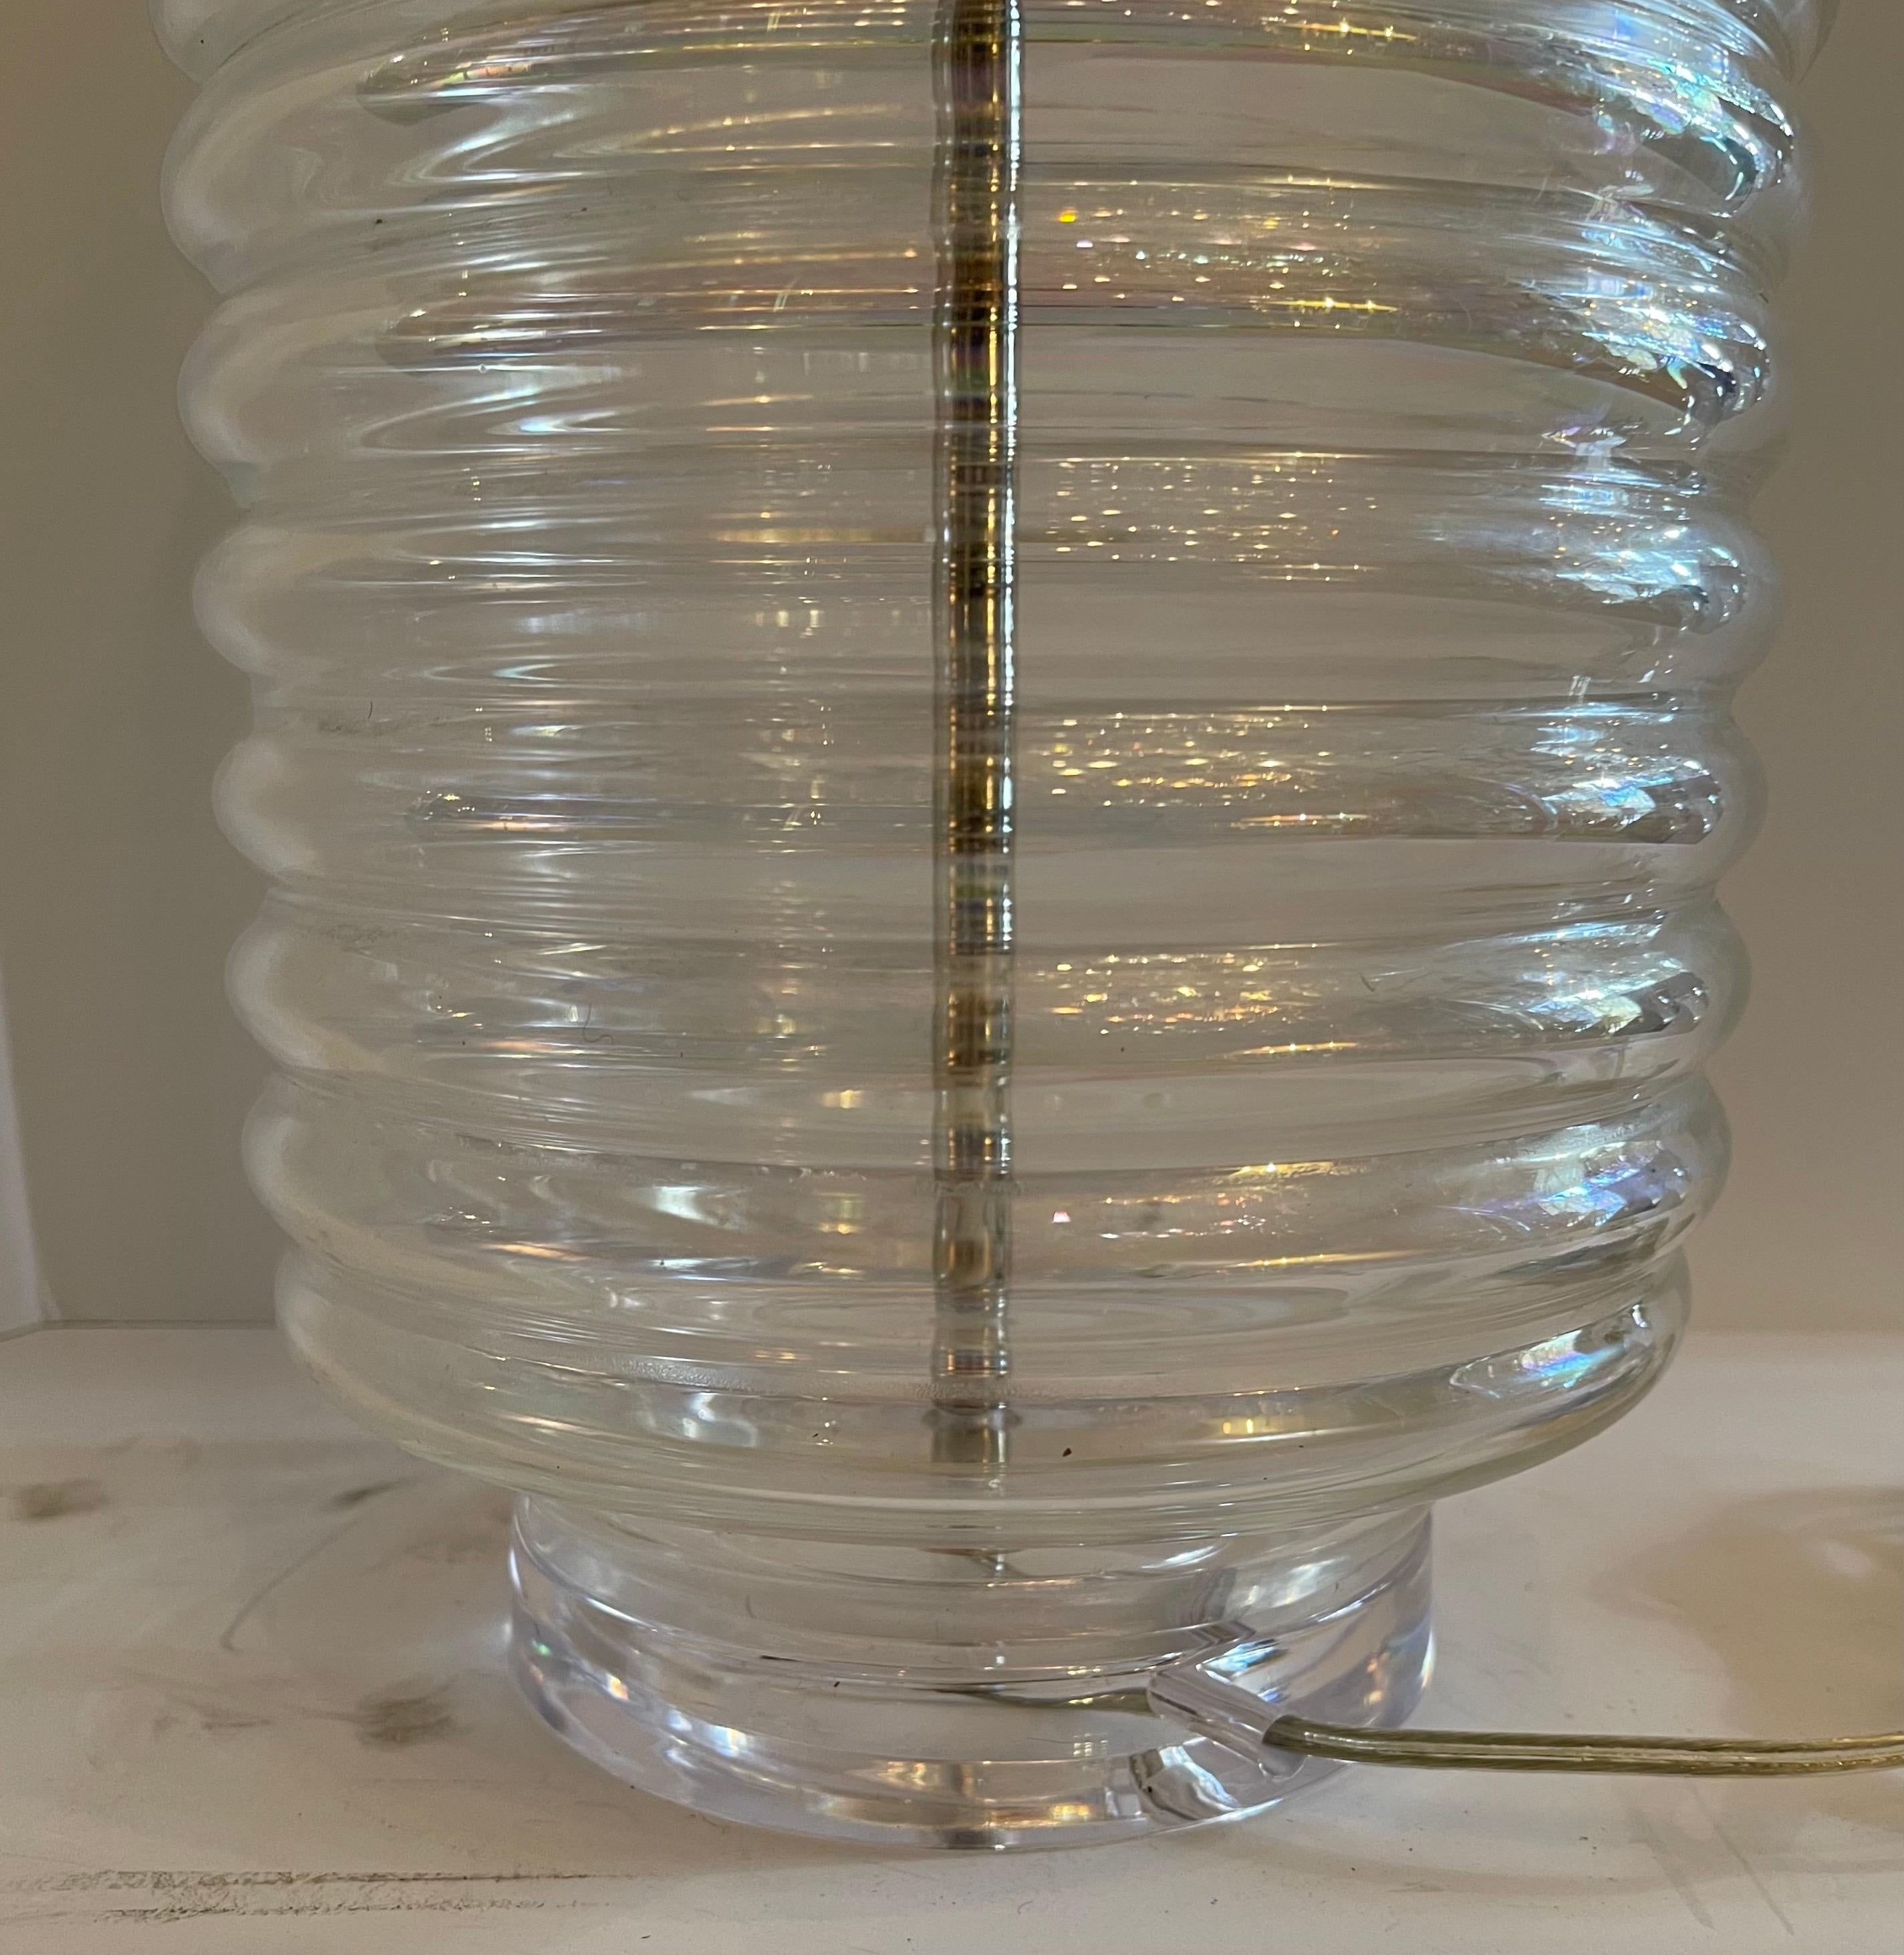 Wonderful Lorin Marsh Murano Italy Art Glass Beehive Iridescent Lamp Lucite Base In Good Condition For Sale In Roslyn, NY